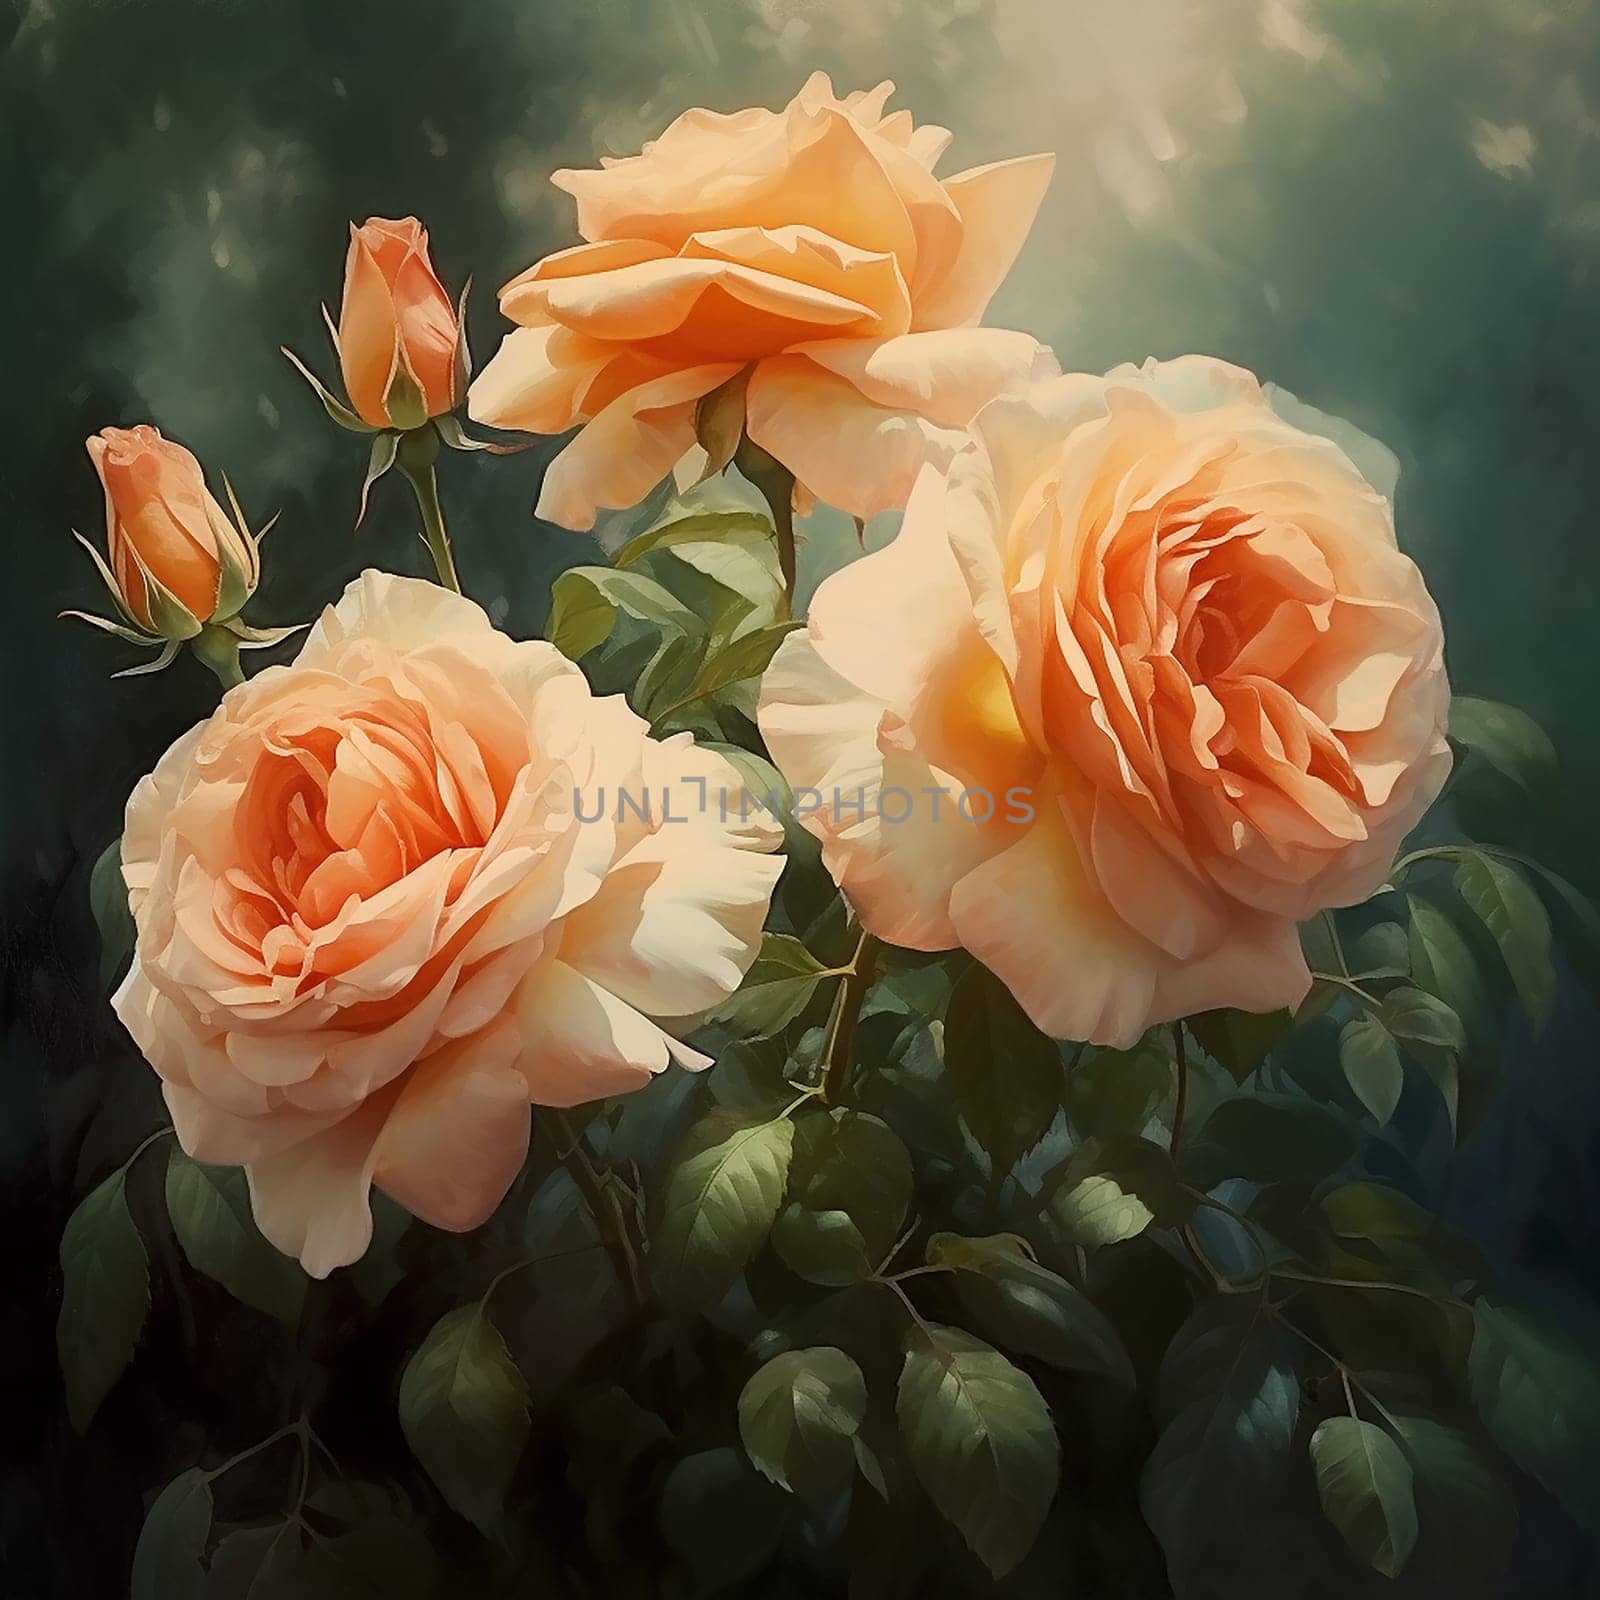 A digital painting of vibrant orange roses amidst lush green foliage. by Hype2art